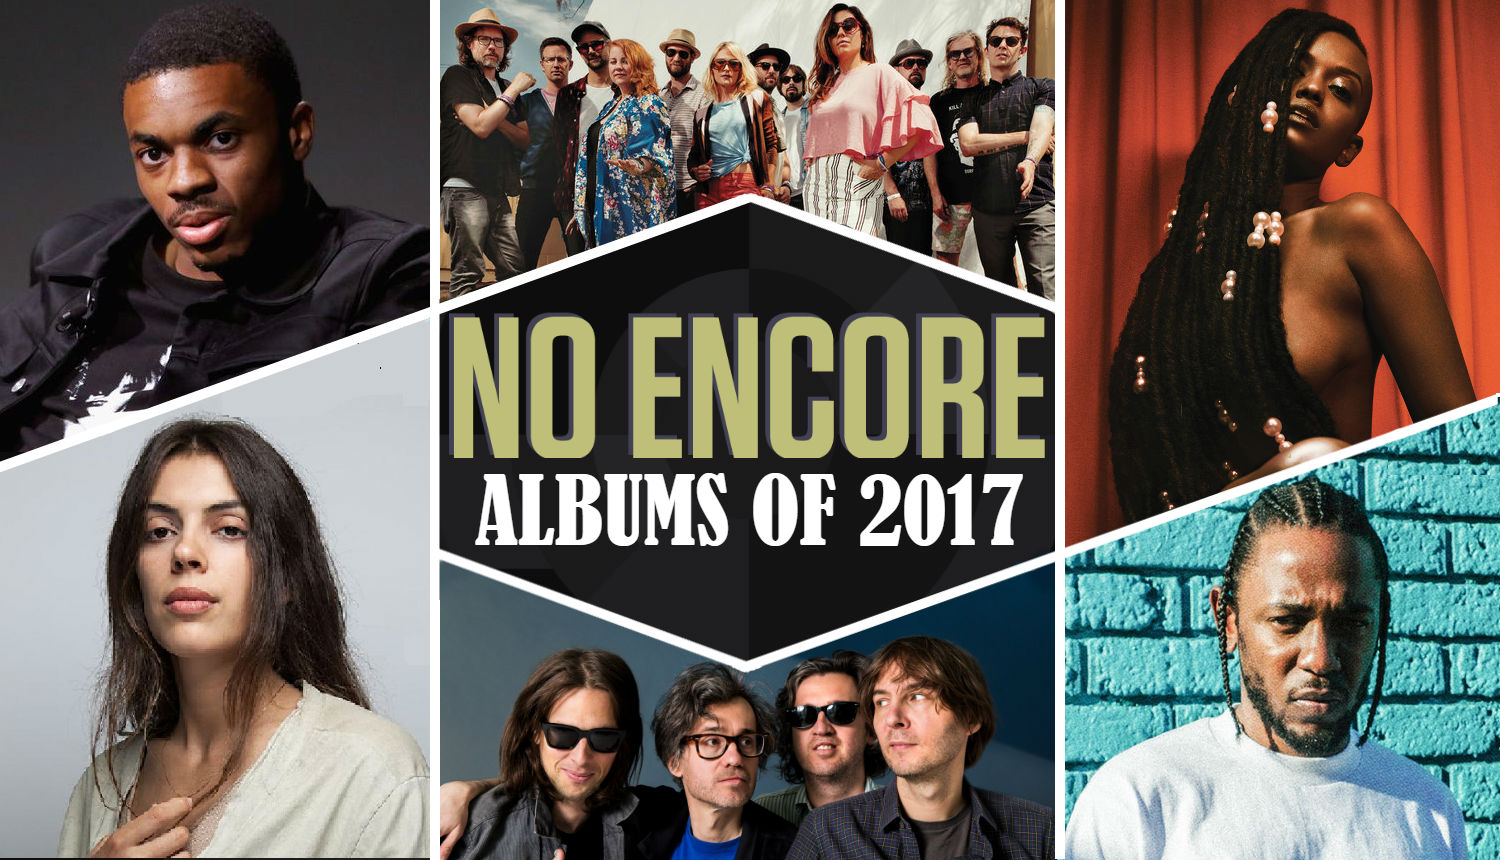 NO ENCORE THE TOP 20 ALBUMS OF 2017 - HeadStuff.org